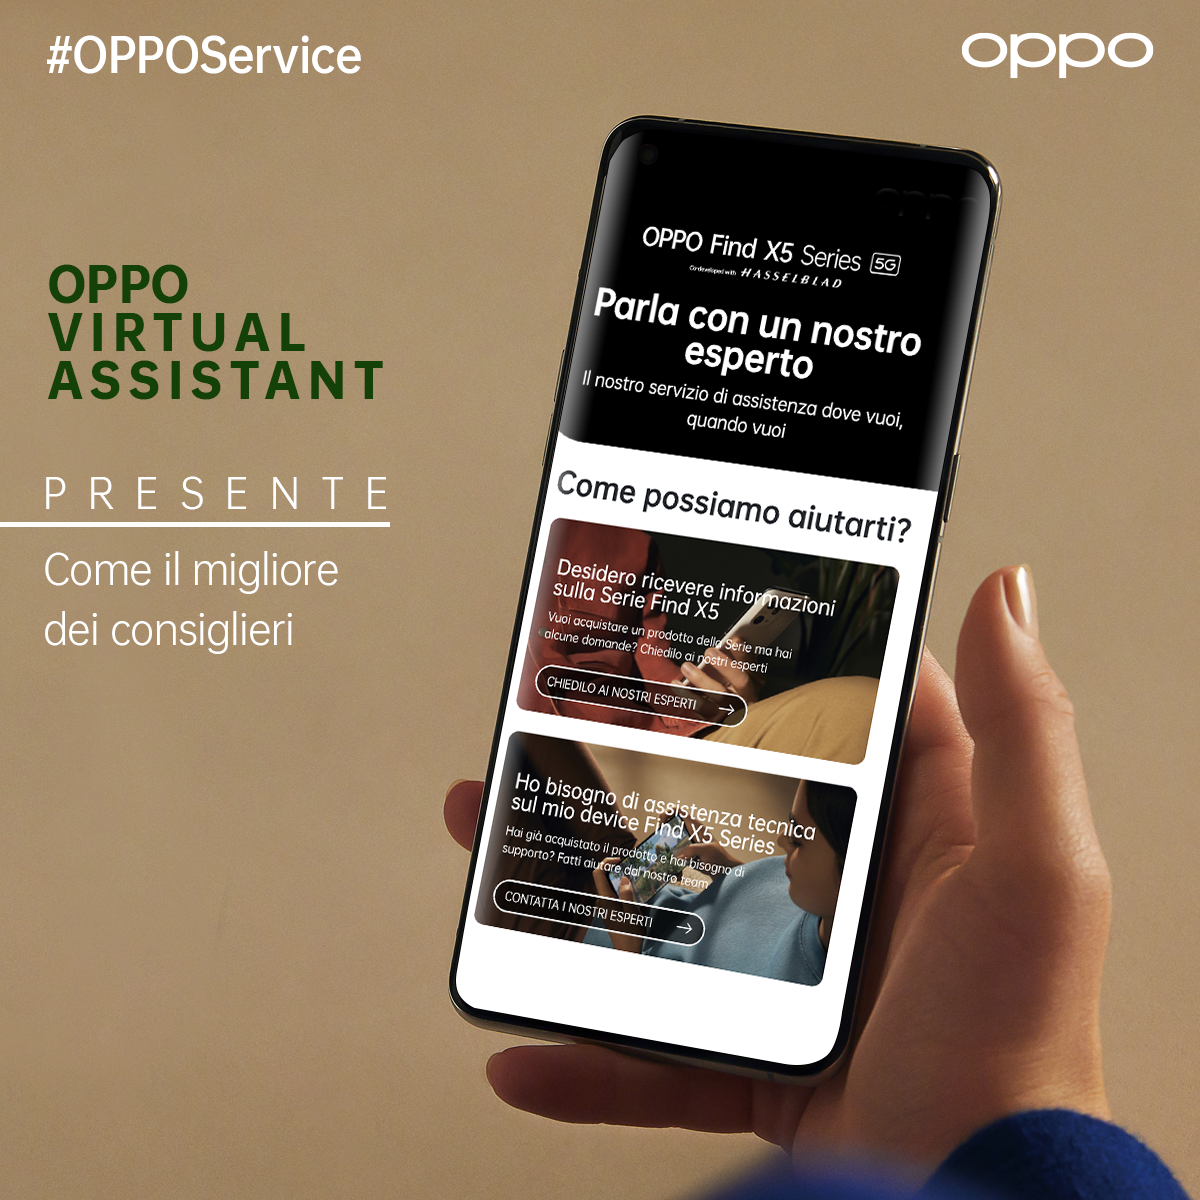 OPPO Virtual Assistant